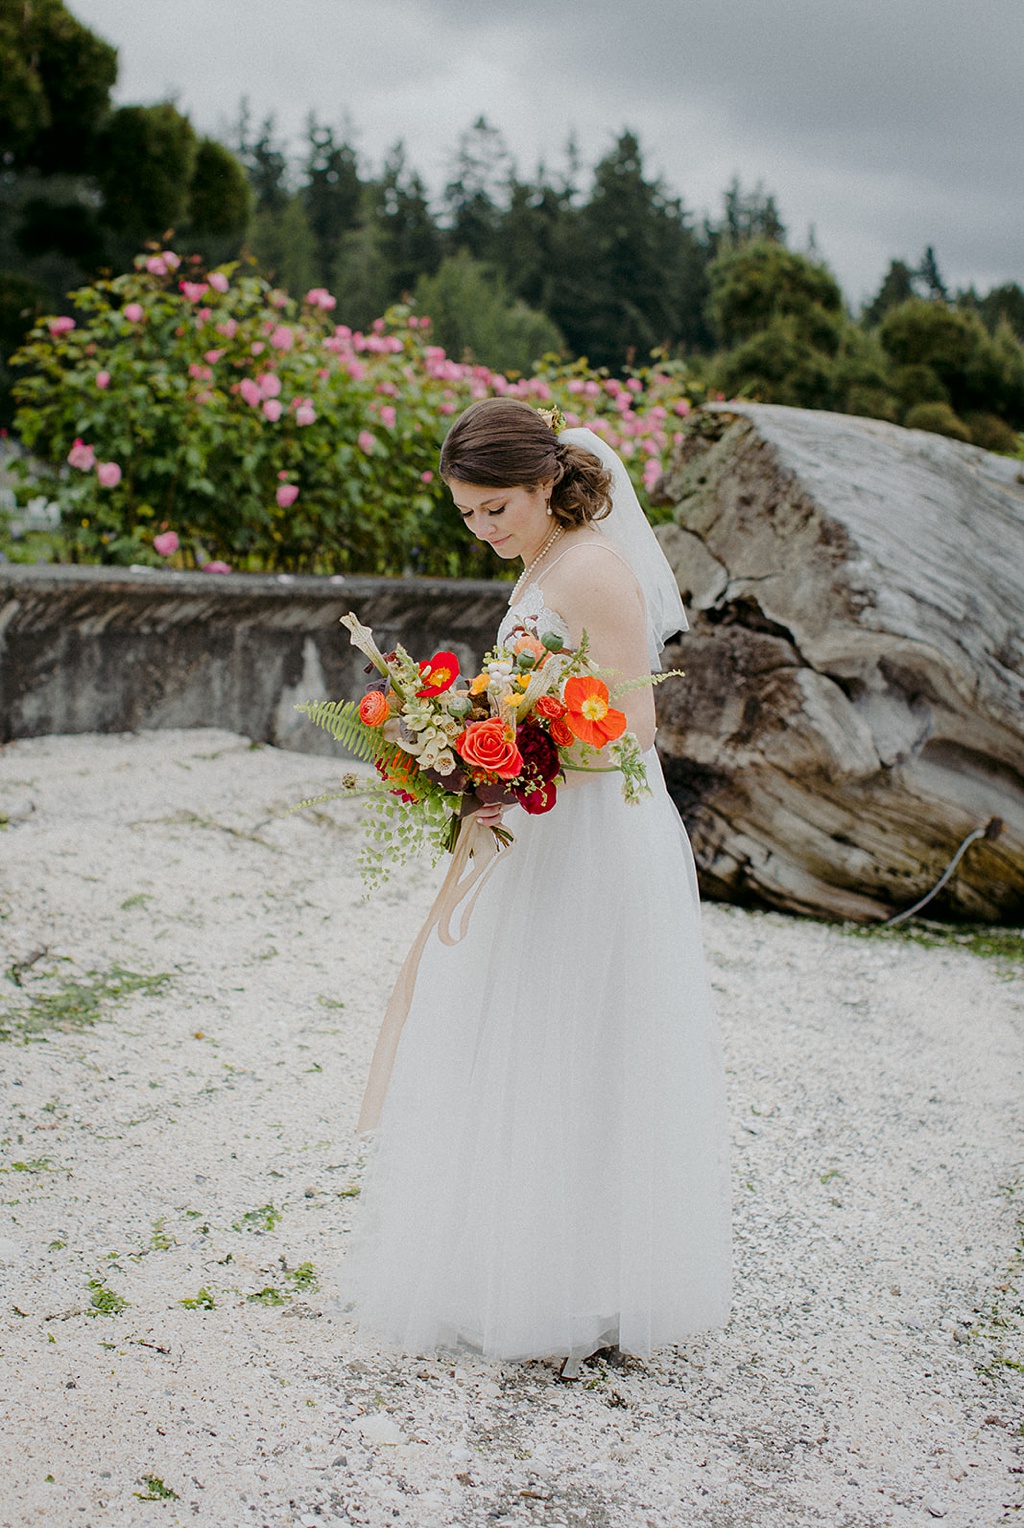 The bride holding her bouquet at Kiana Lodge